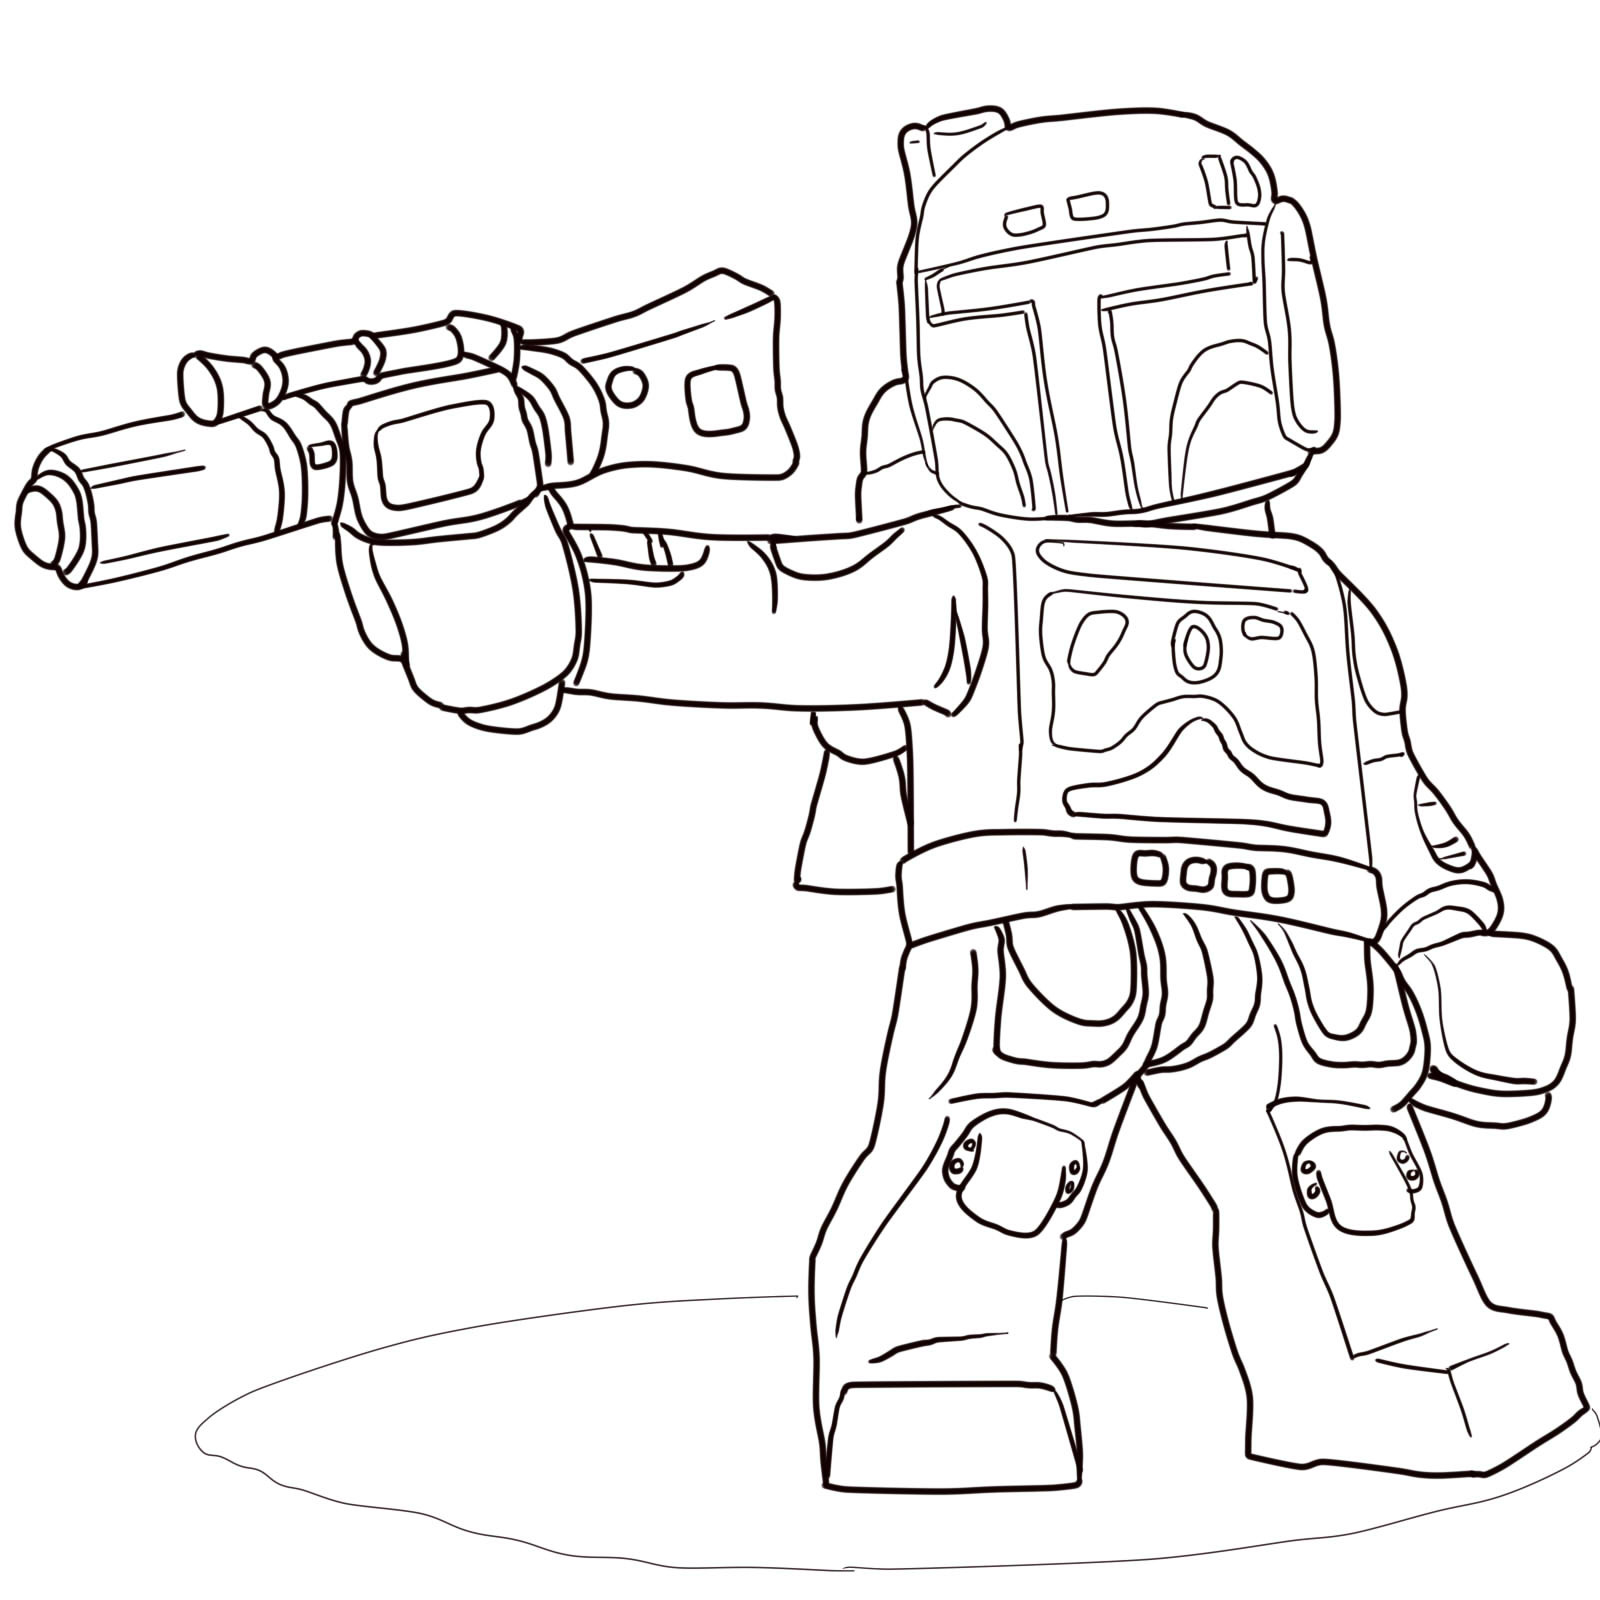 Lego star wars boba fet coloring page